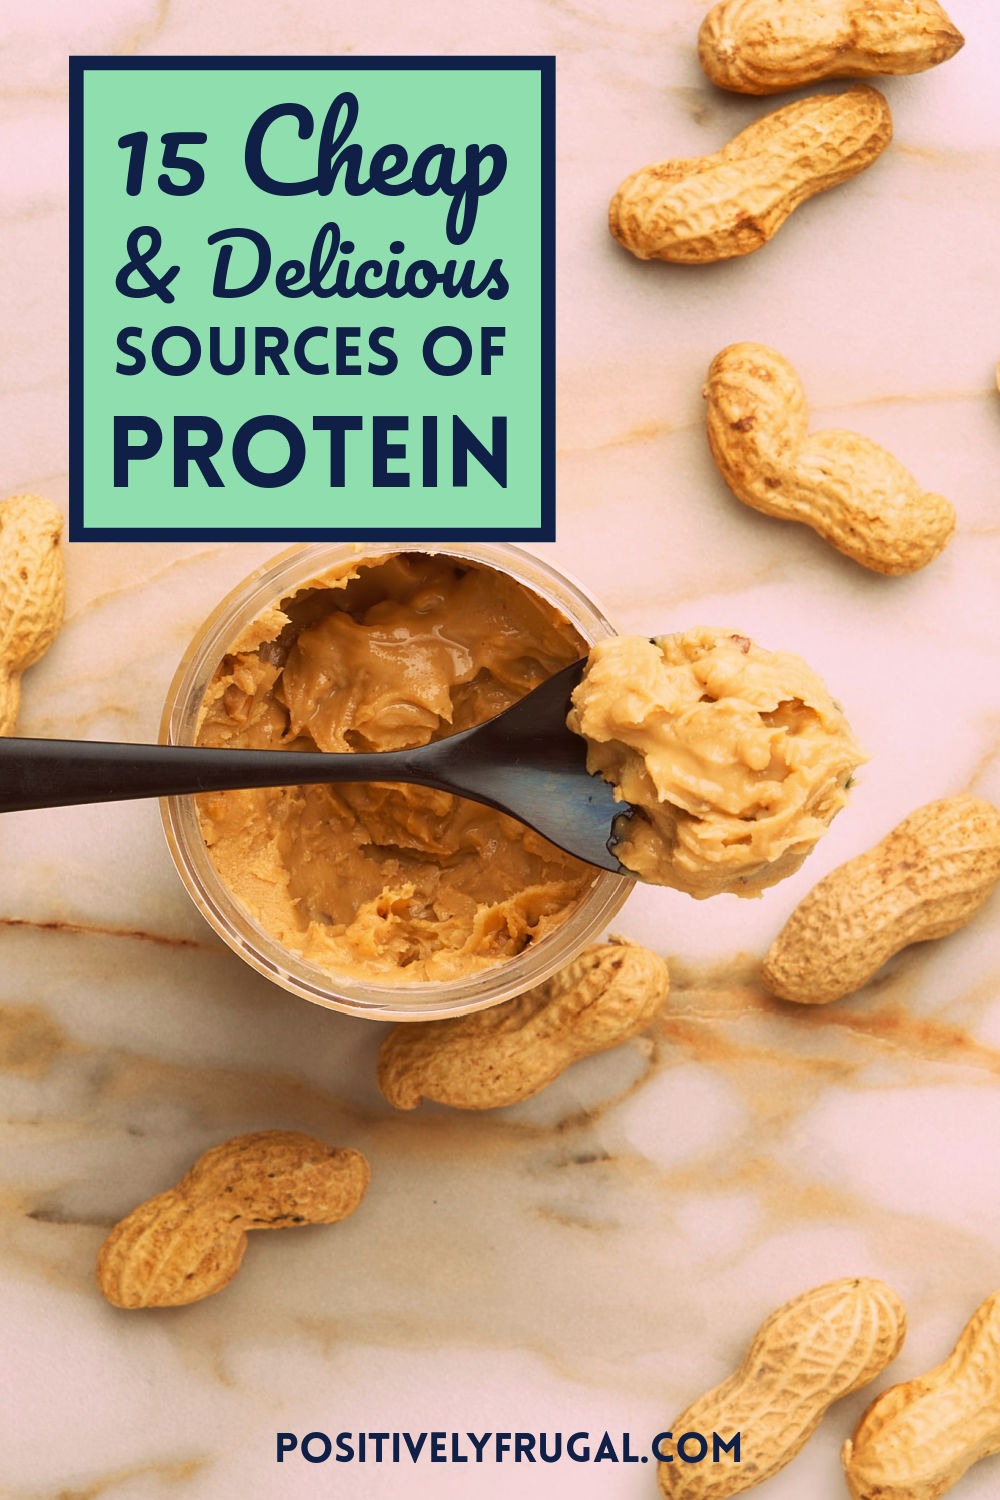 Cheap Sources of Protein for Frugal Foodies - Positively Frugal